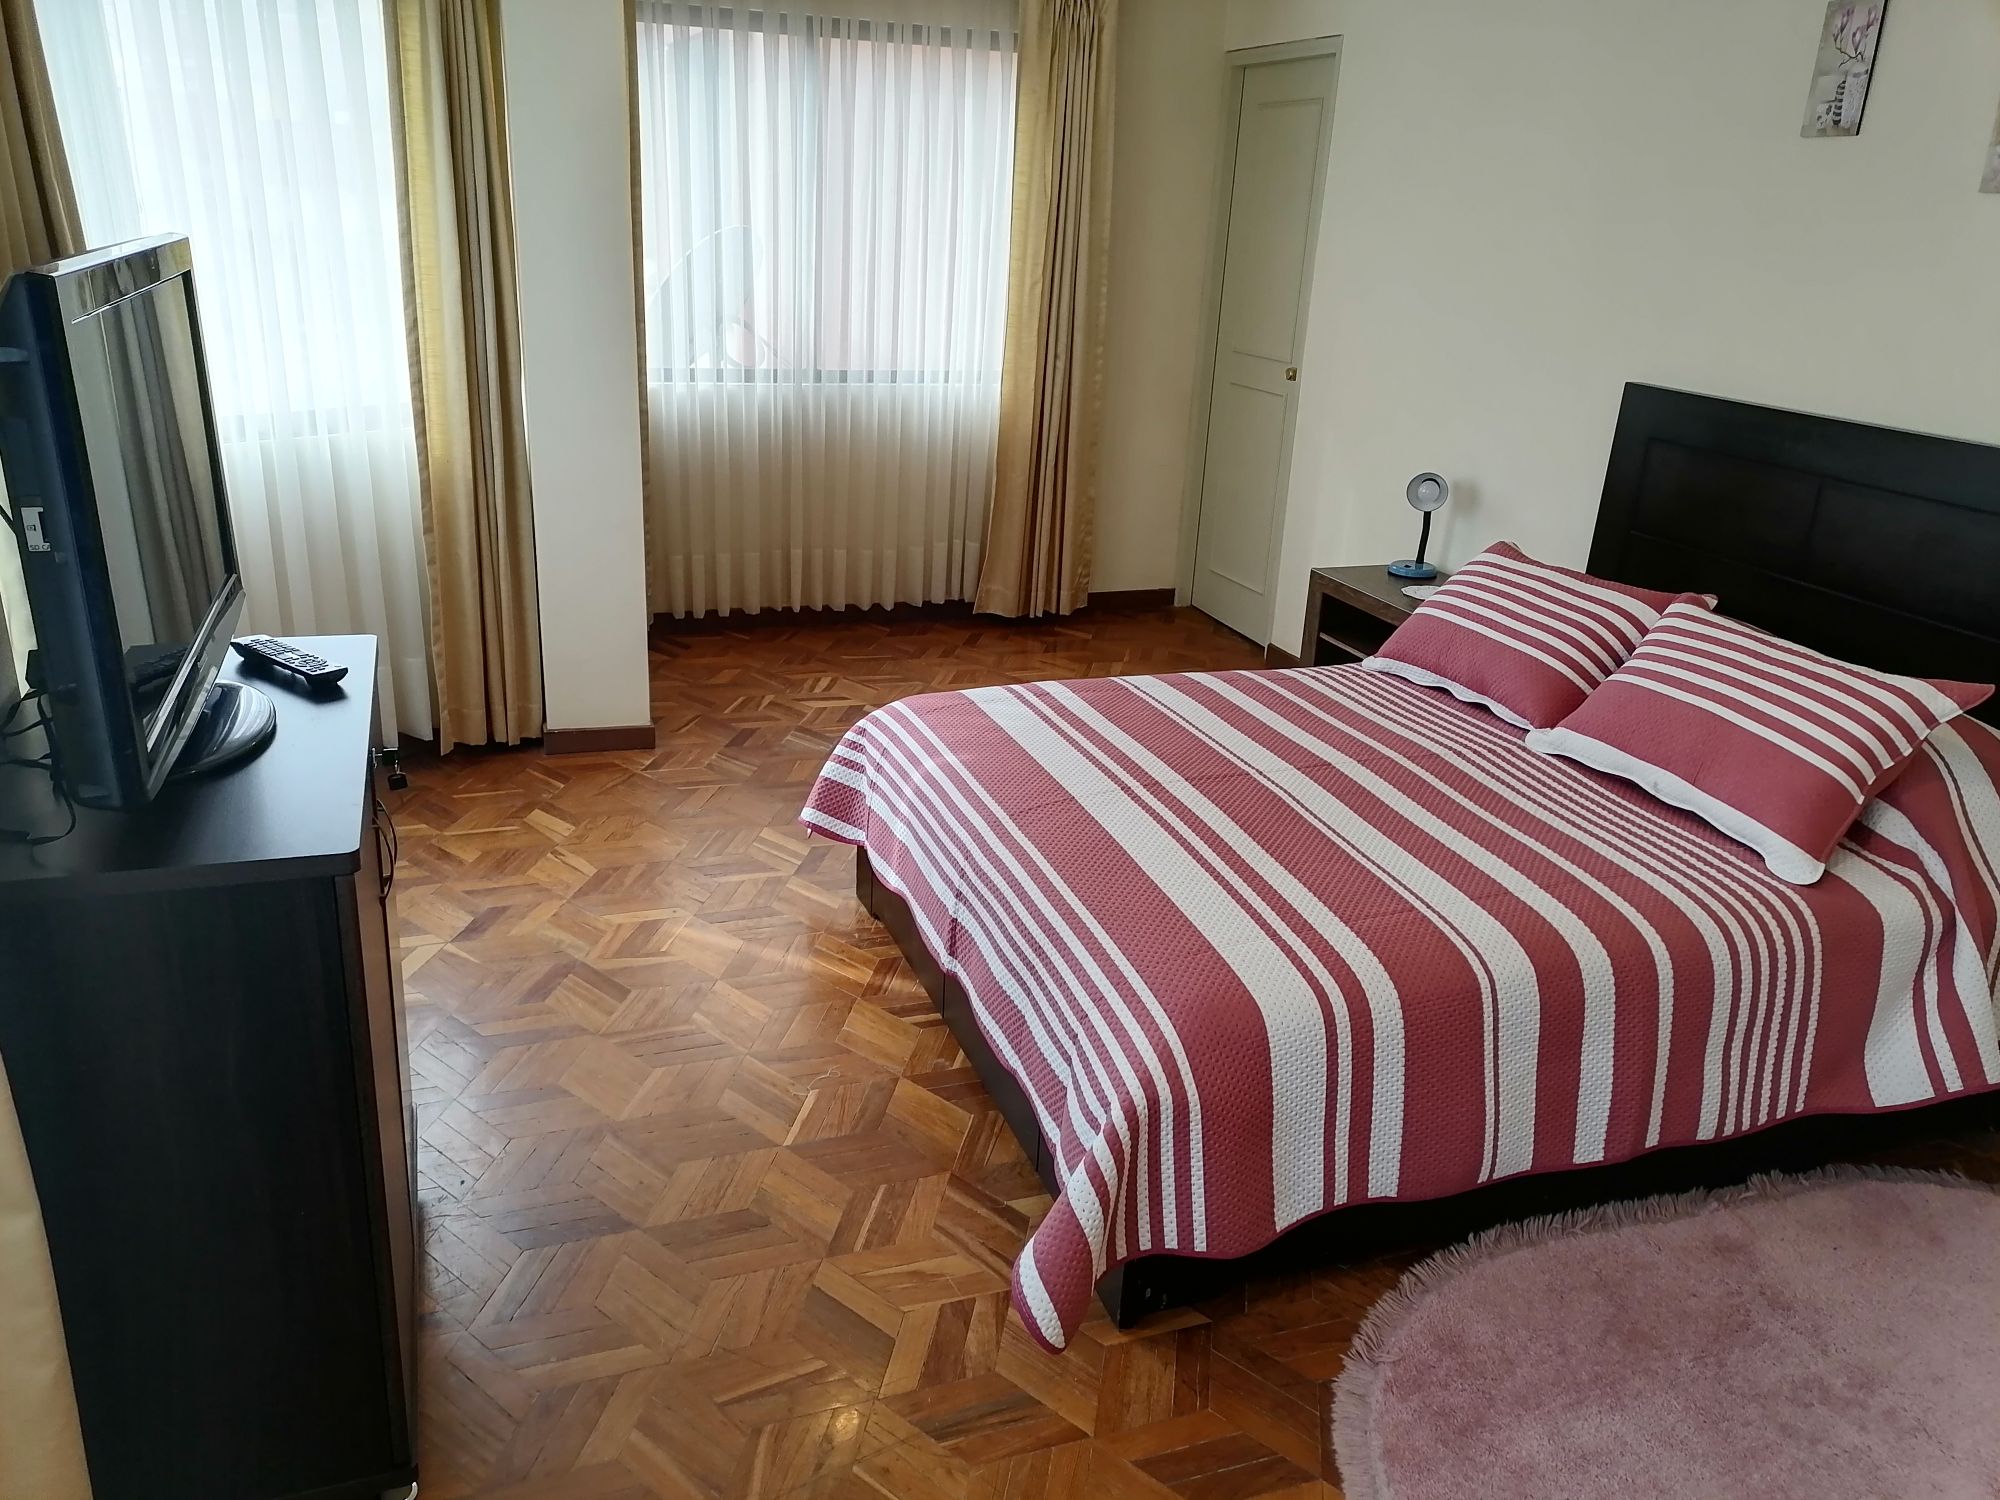  Apartments For Rent In La Paz Bolivia with Simple Decor